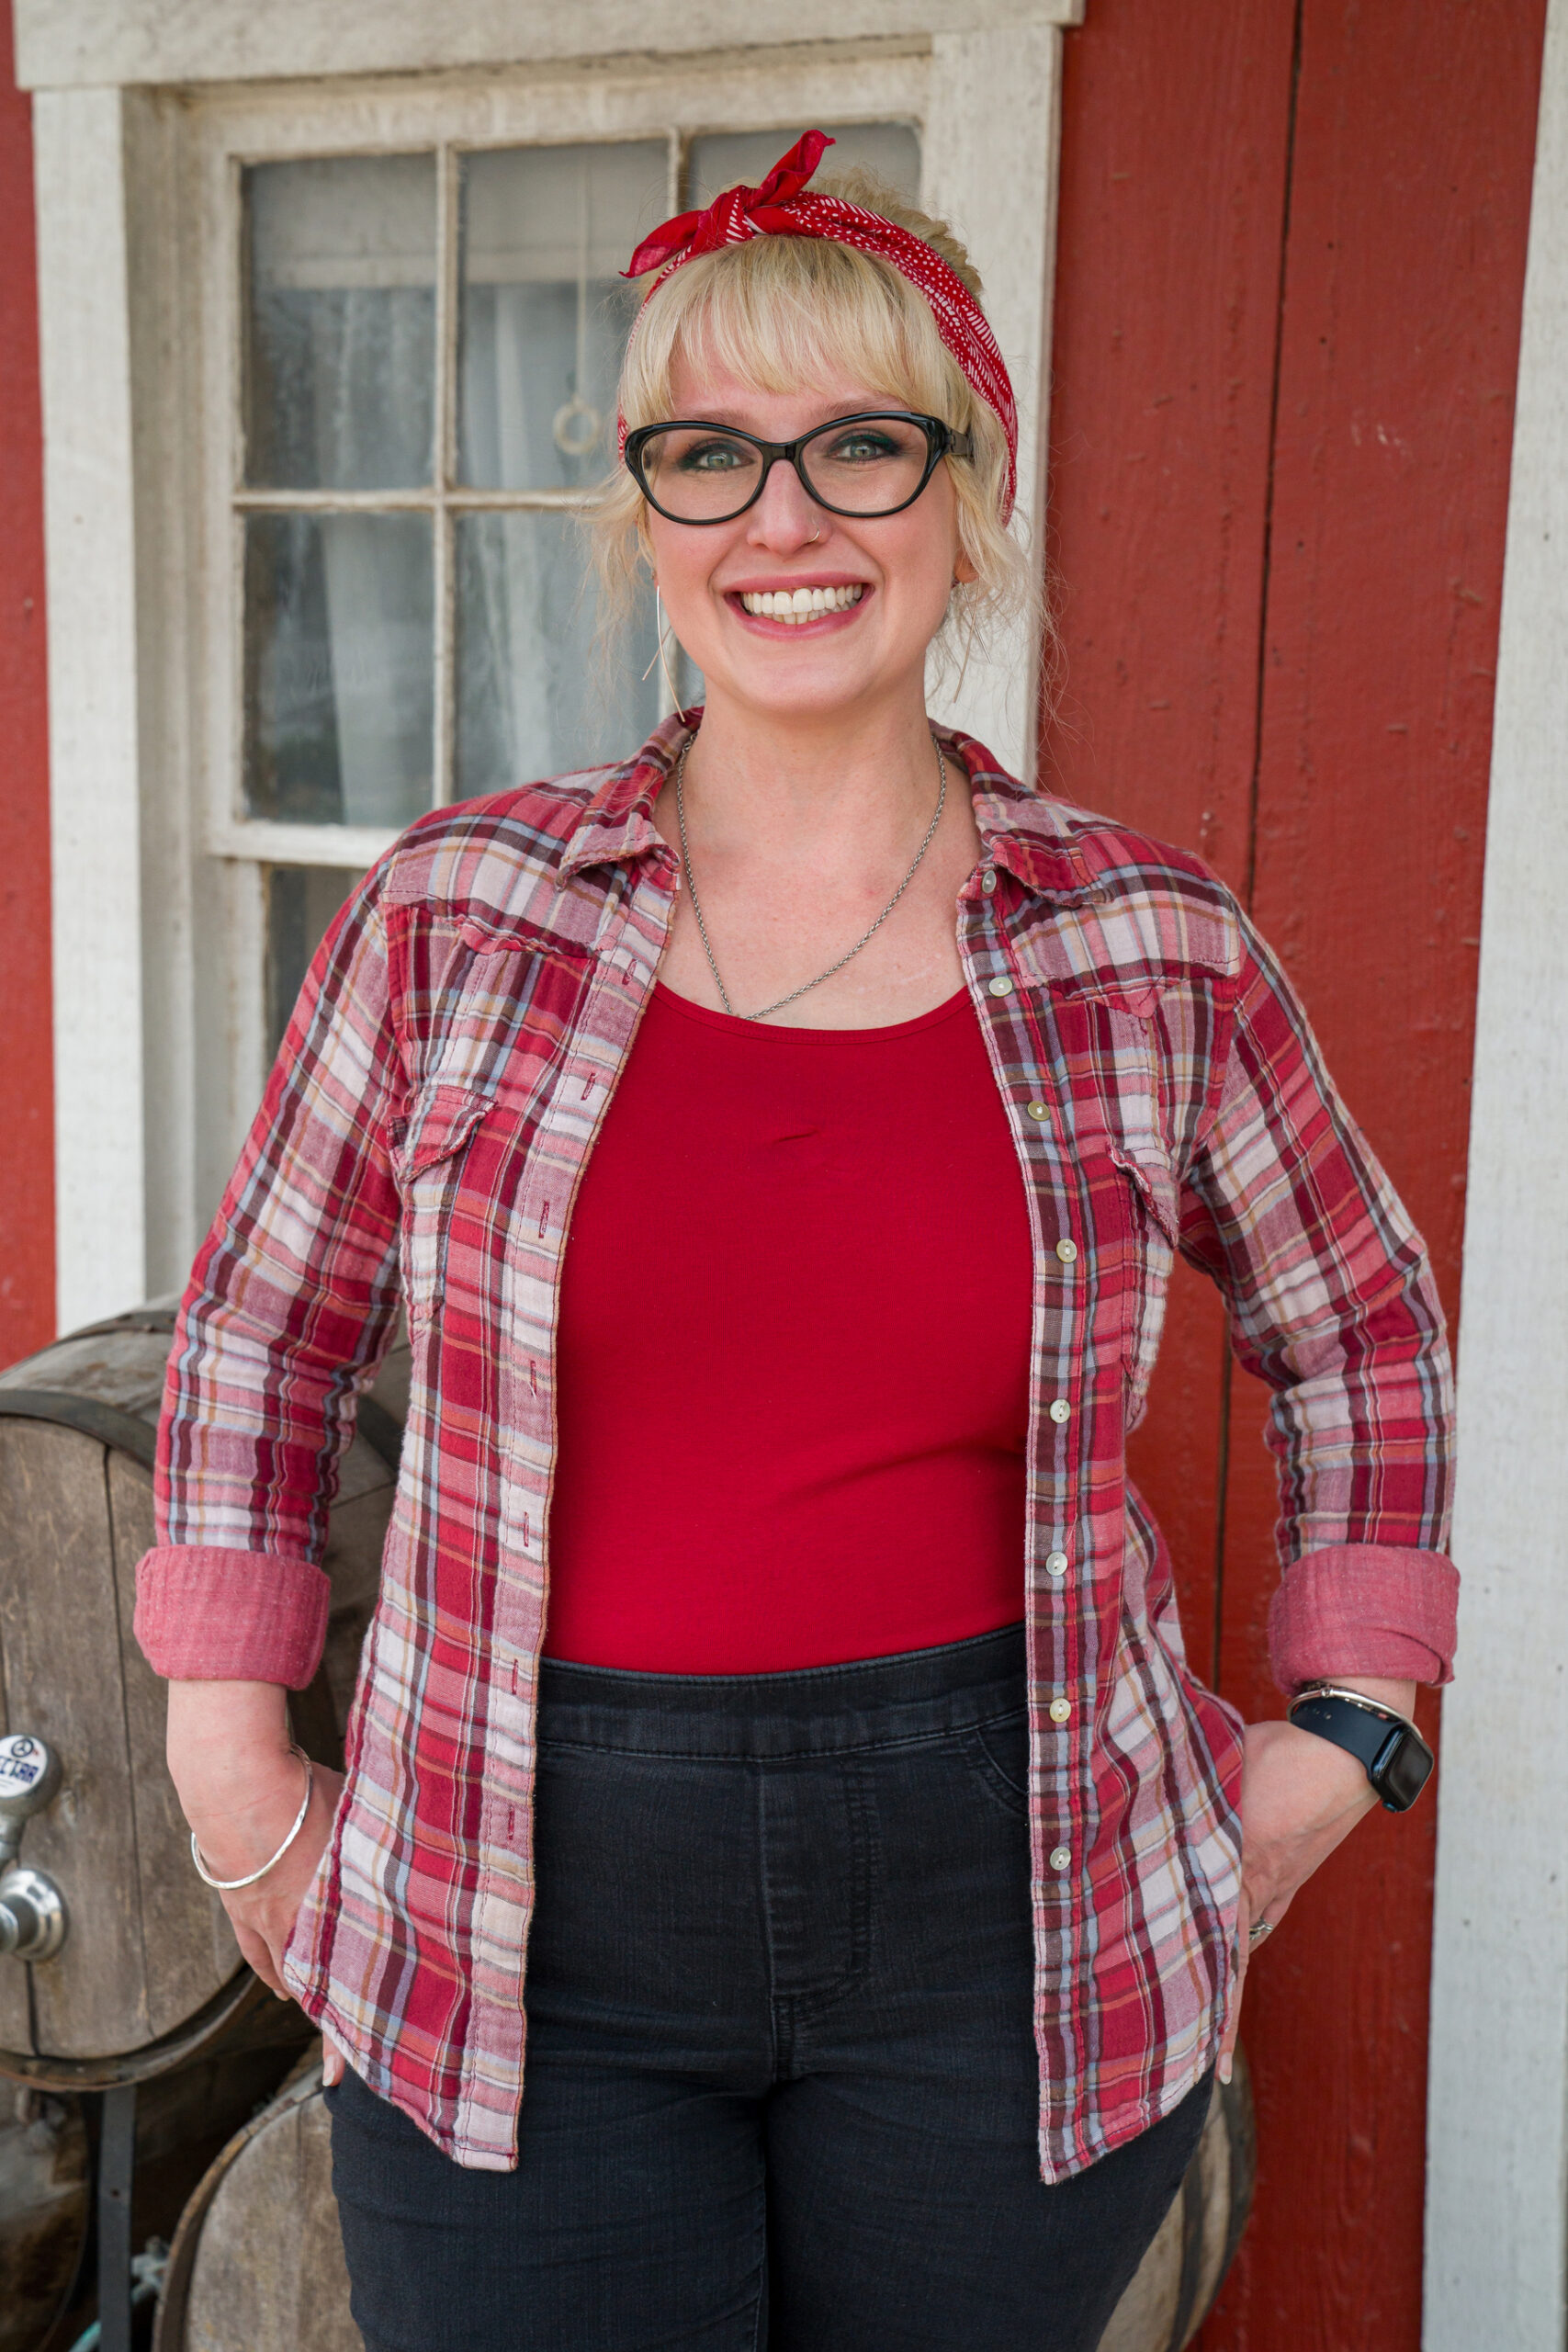 A woman with blonde hair, glasses, and a plaid shirt smiles in front of a rustic red building